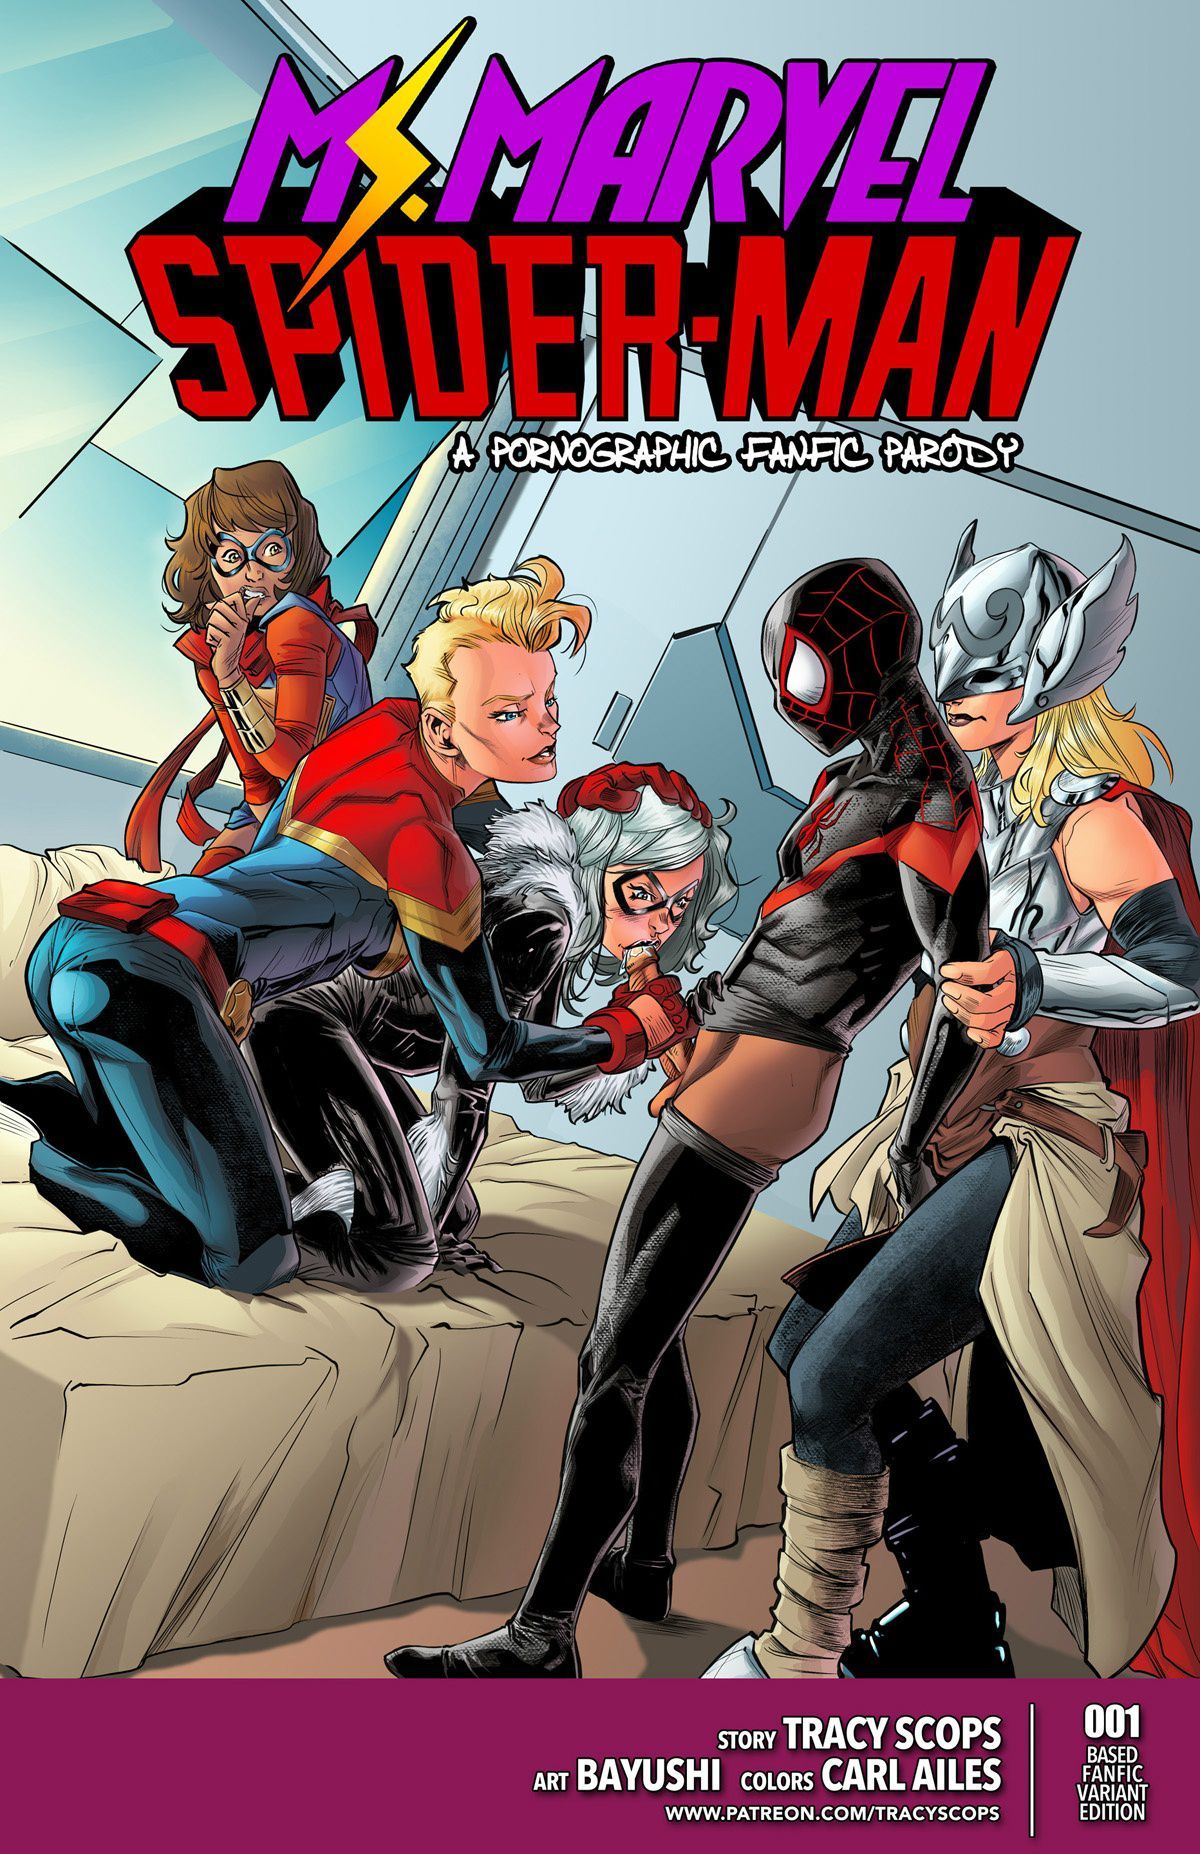 Ms.Marvel - Spiderman 1 Porn Comics by [Tracy Scops] (Marvel,Spider-Man)  Rule 34 Comics â€“ R34Porn